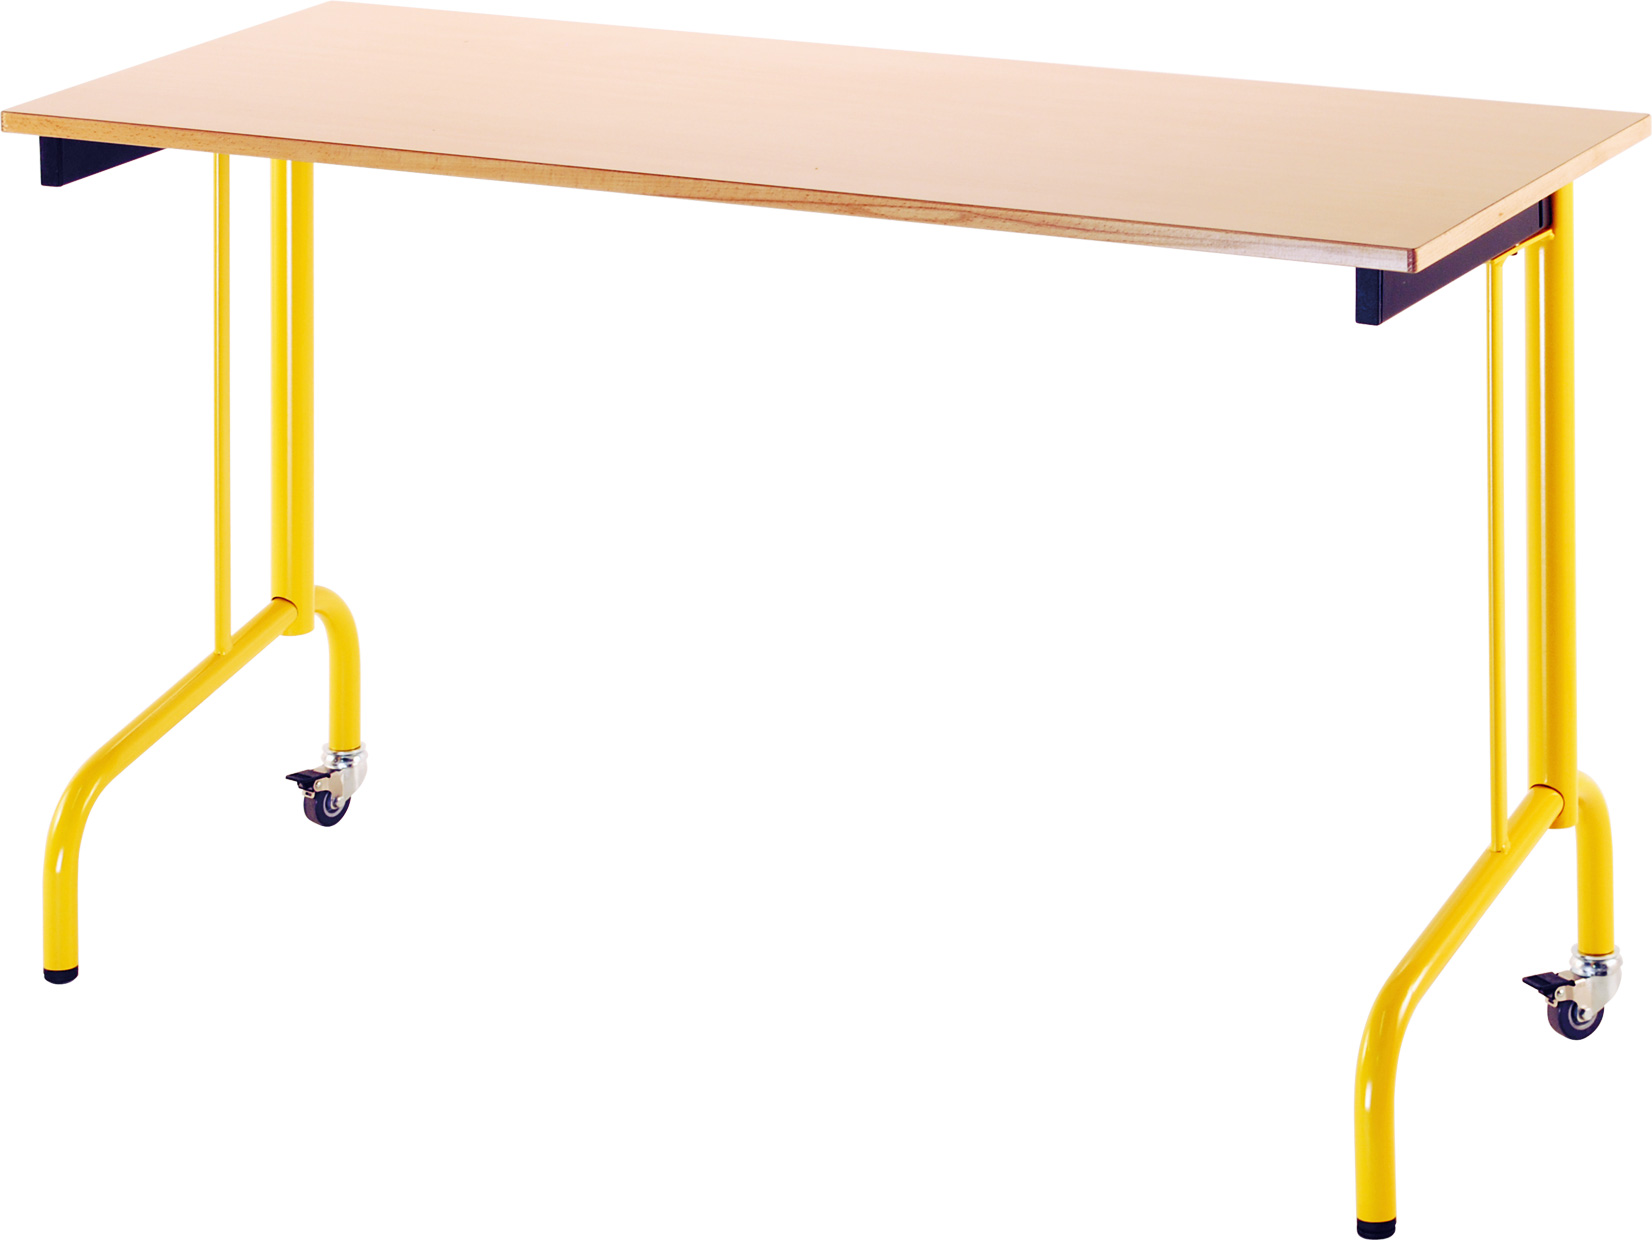 Table scolaire MOBILE TOALENN